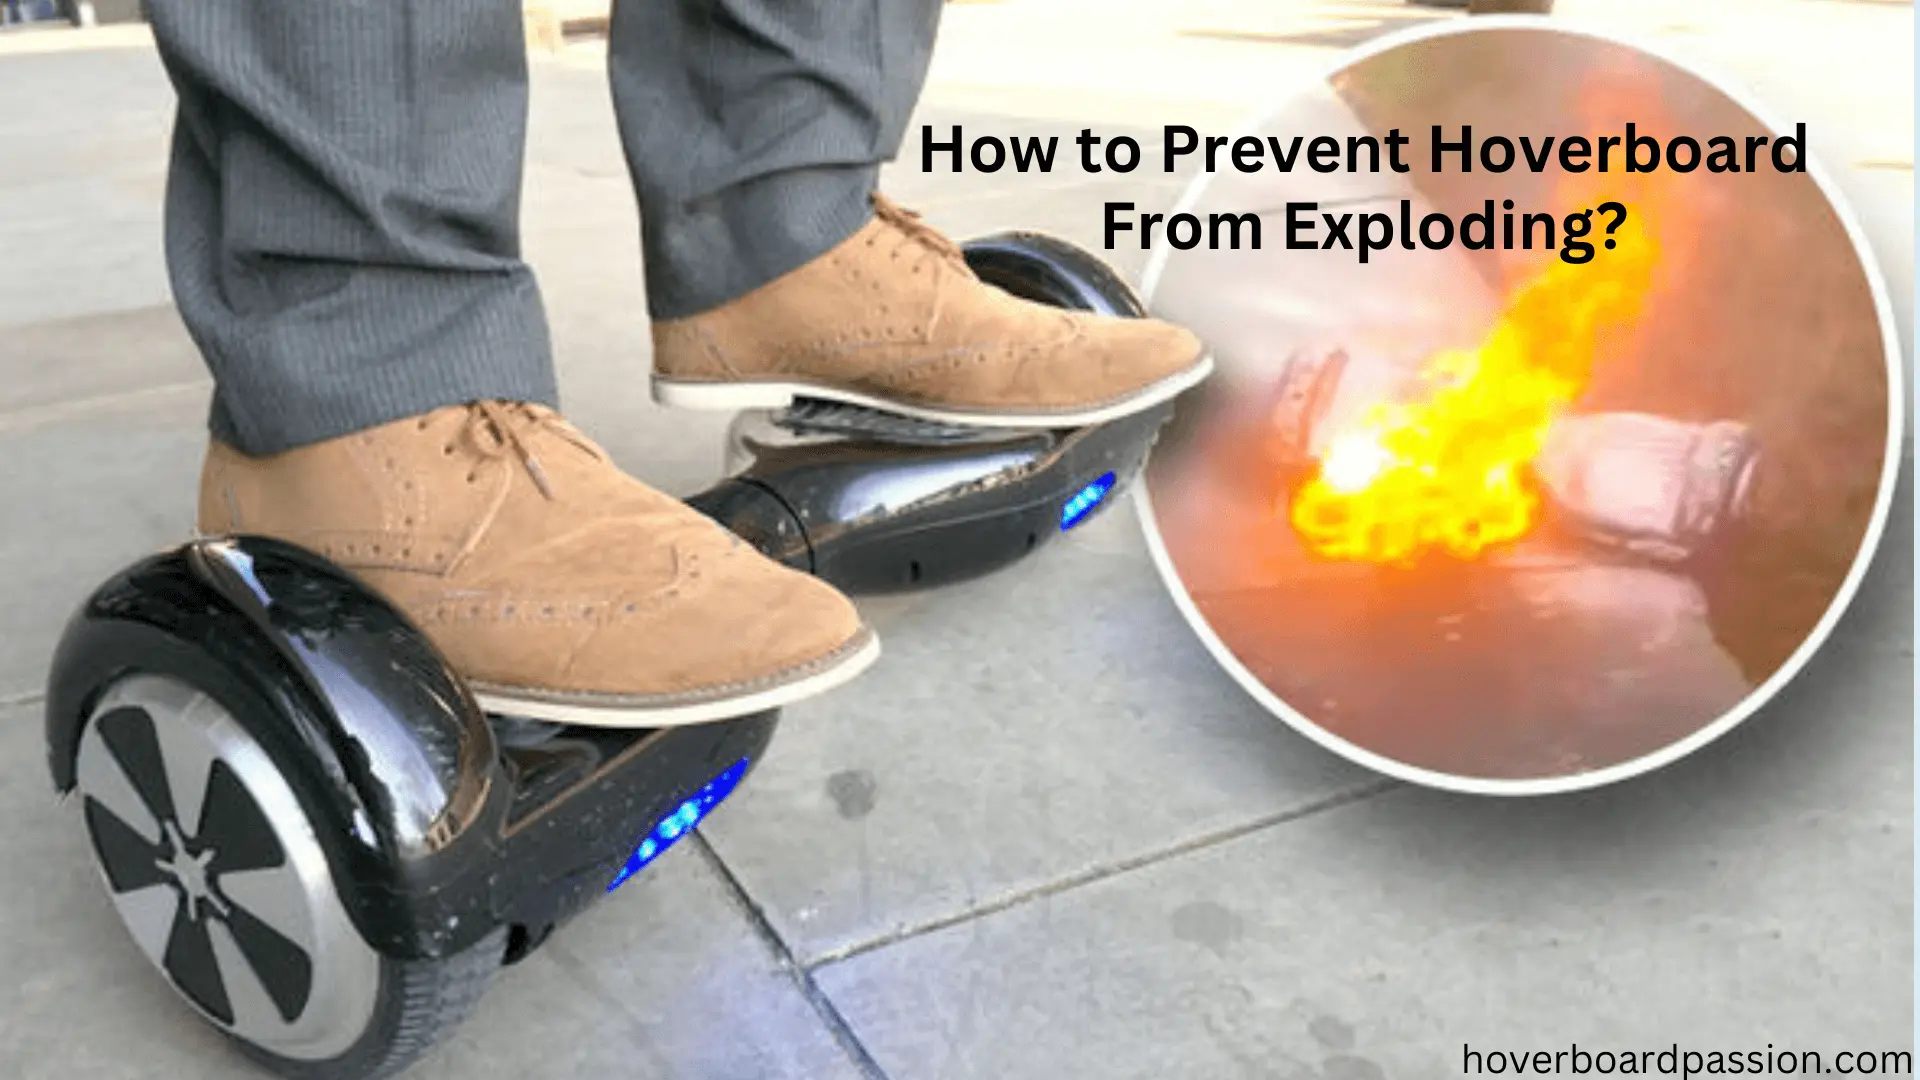 How to Prevent Hoverboard From Exploding?